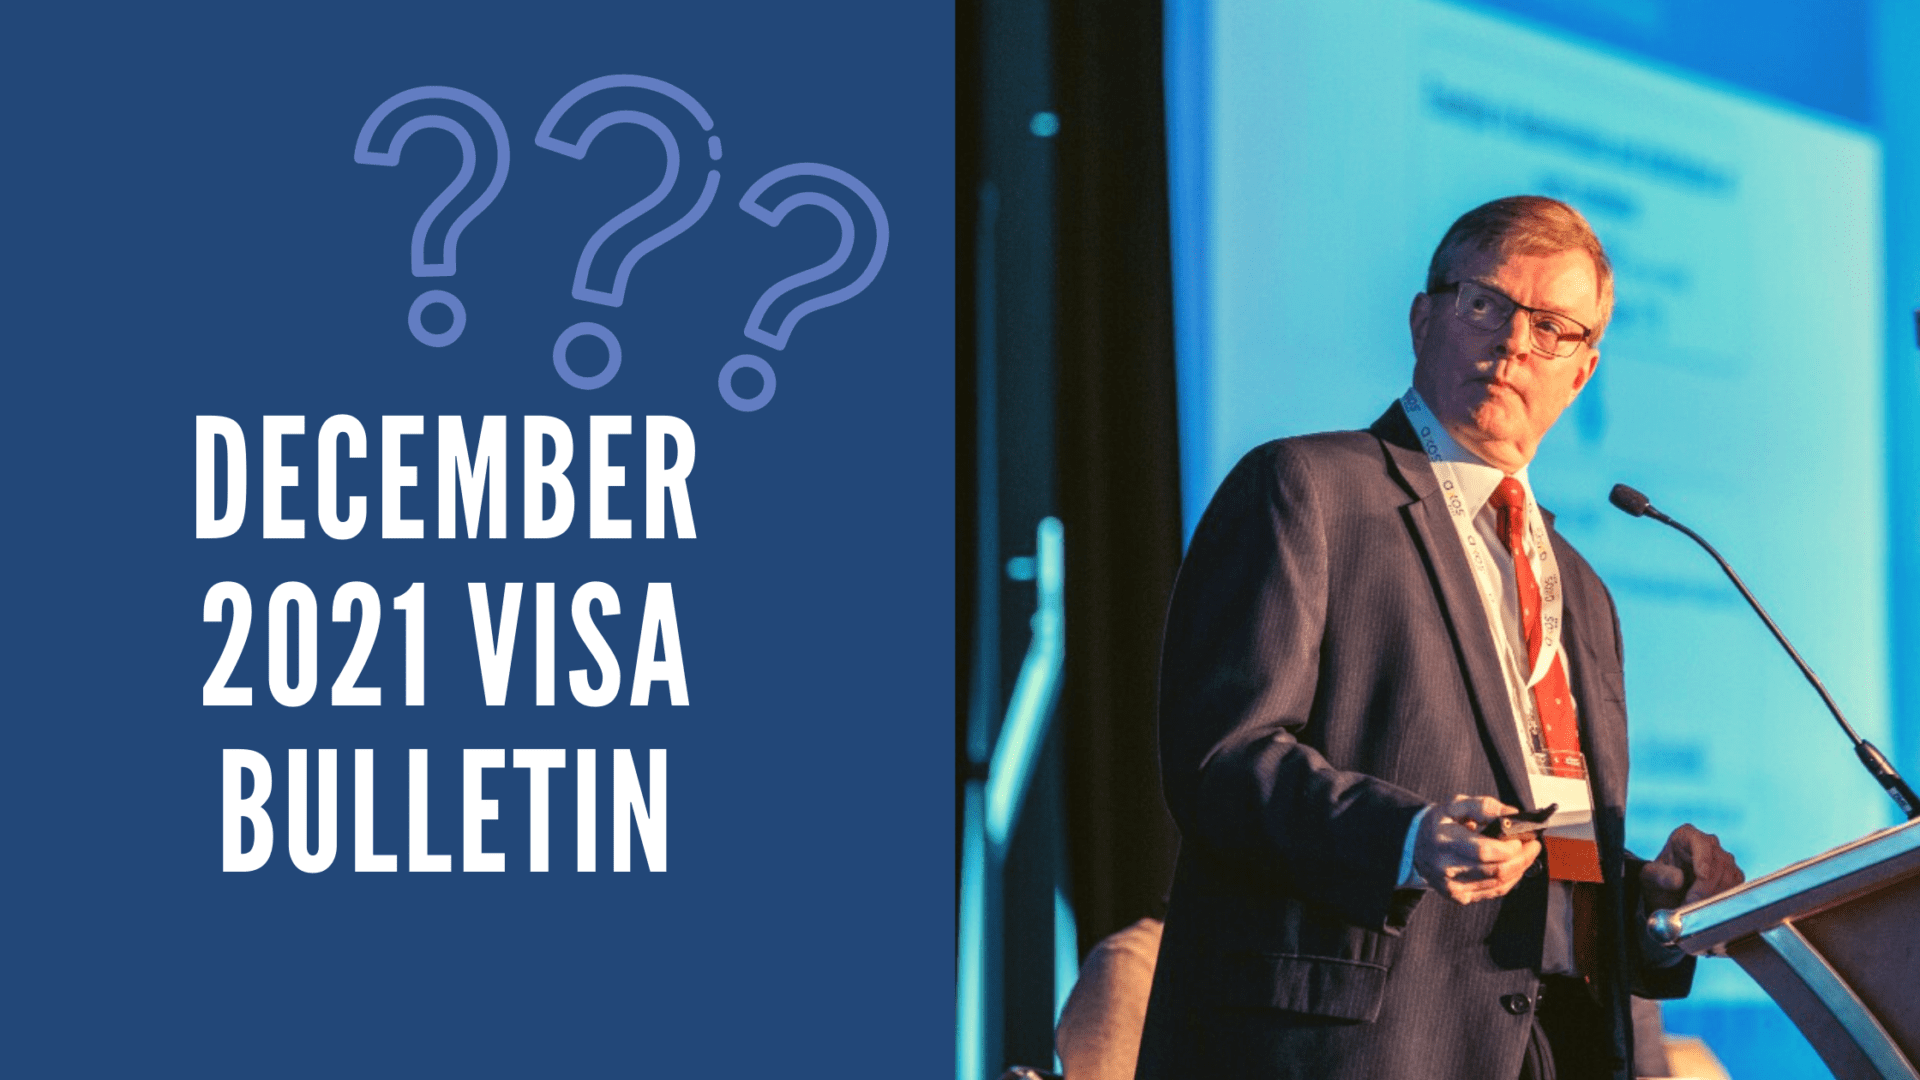 Advance Information About the Upcoming December Visa Bulletin and the Latest Data on EB-5 Waitlist at the National Visa Center